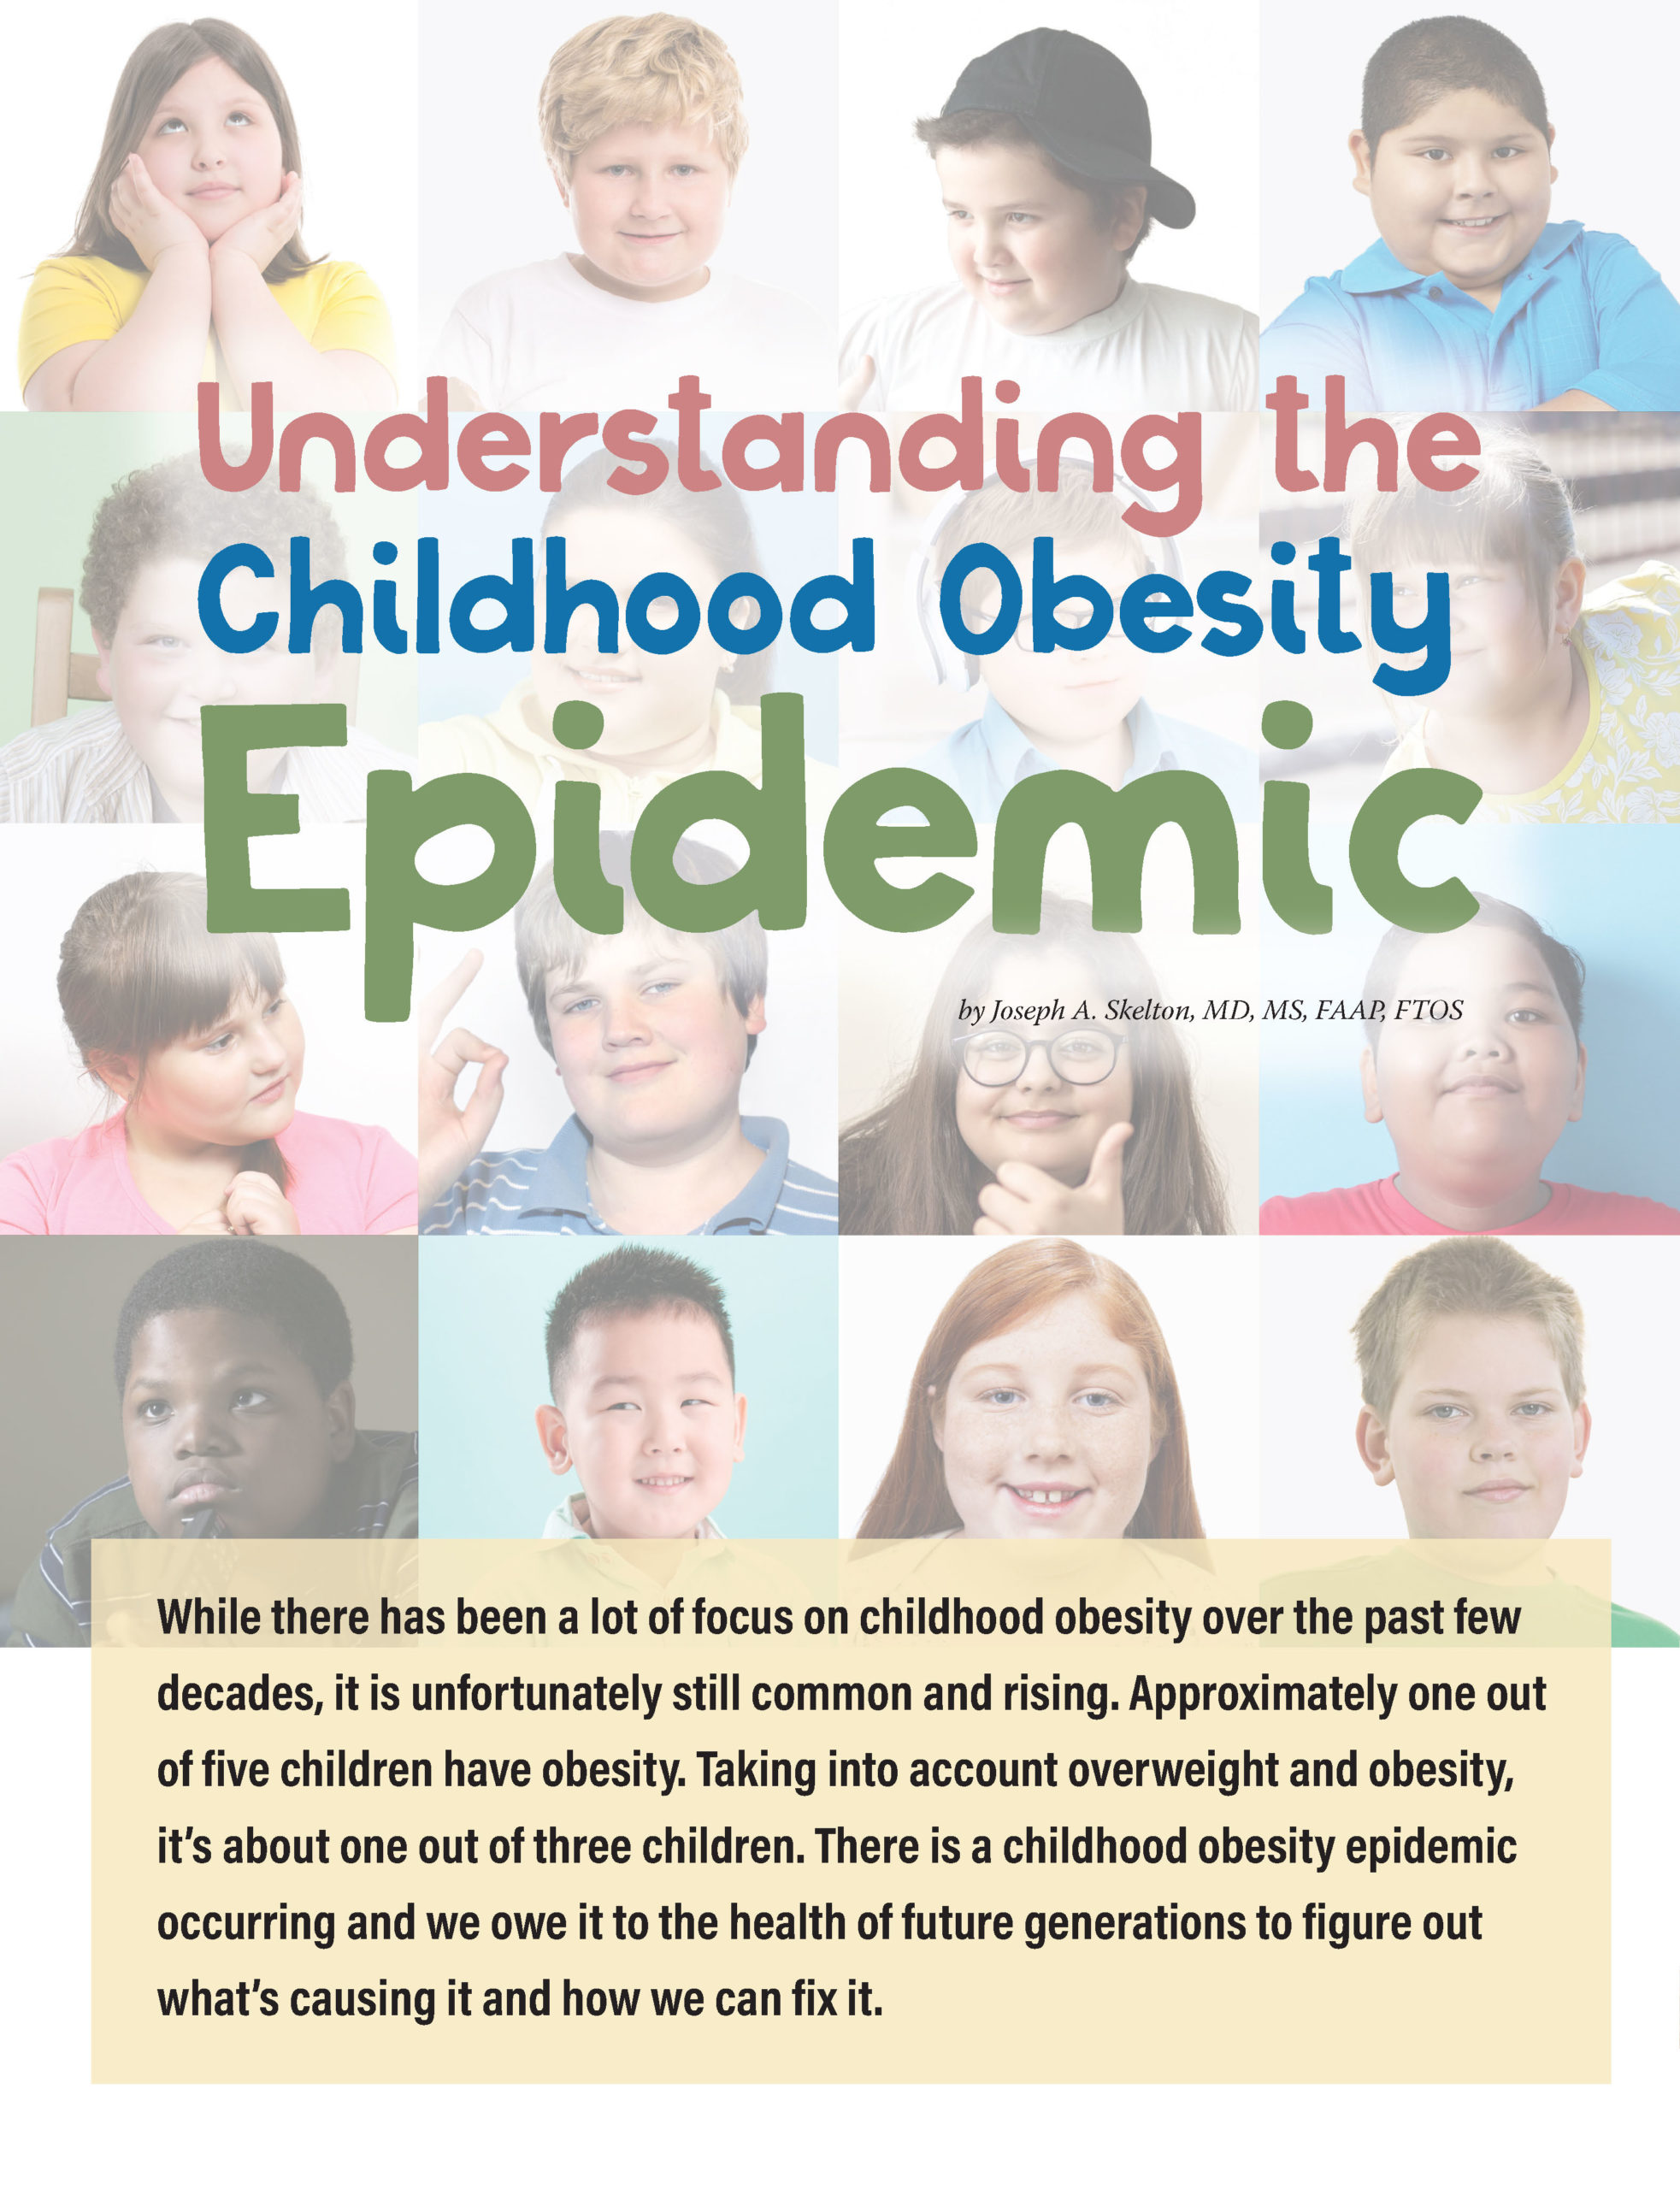 research on obesity in childhood